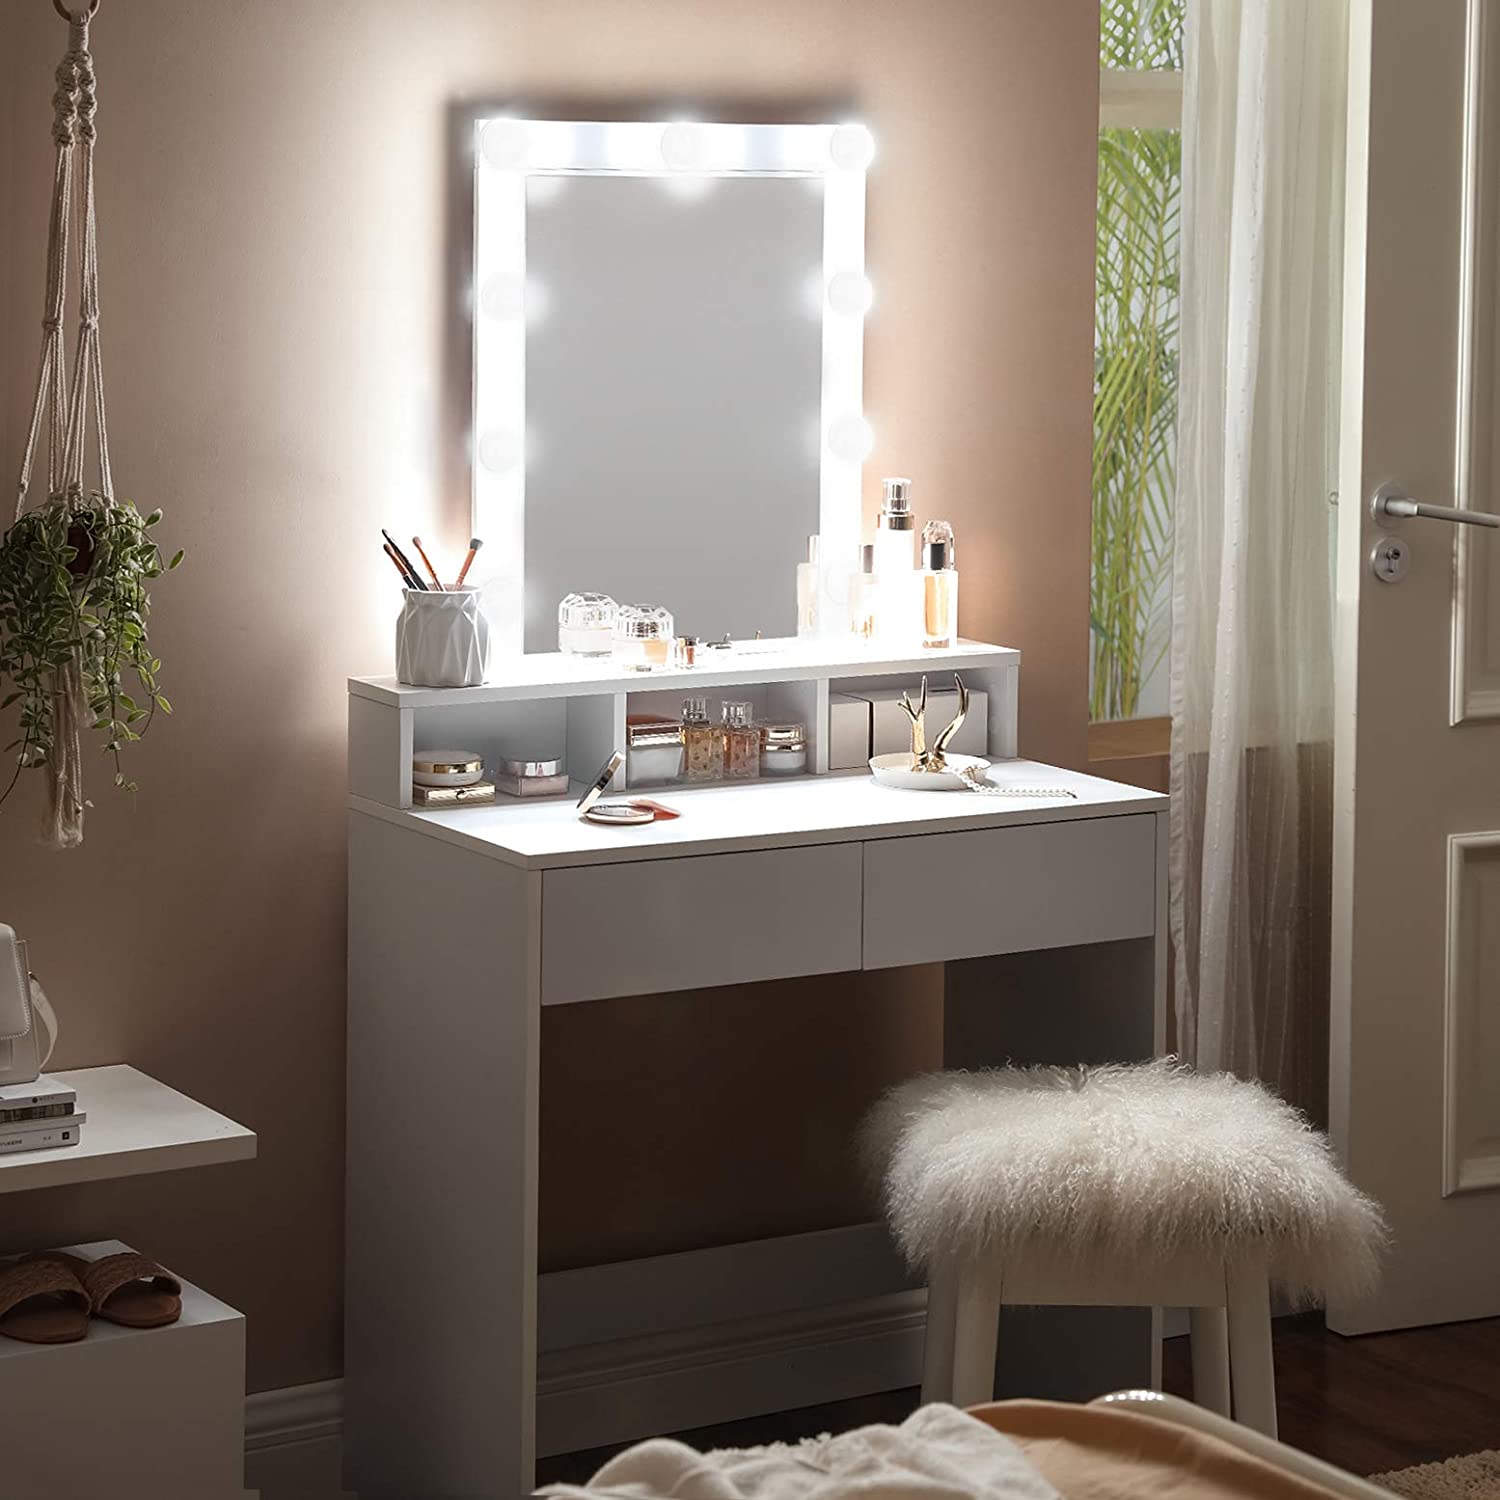 Nancy's Goldstone Dressing Table - Cosmetics Table - Mirror - Lighting - 2 Drawers - Open Compartments - White - Engineered Wood - 80 x 40 x 145 cm